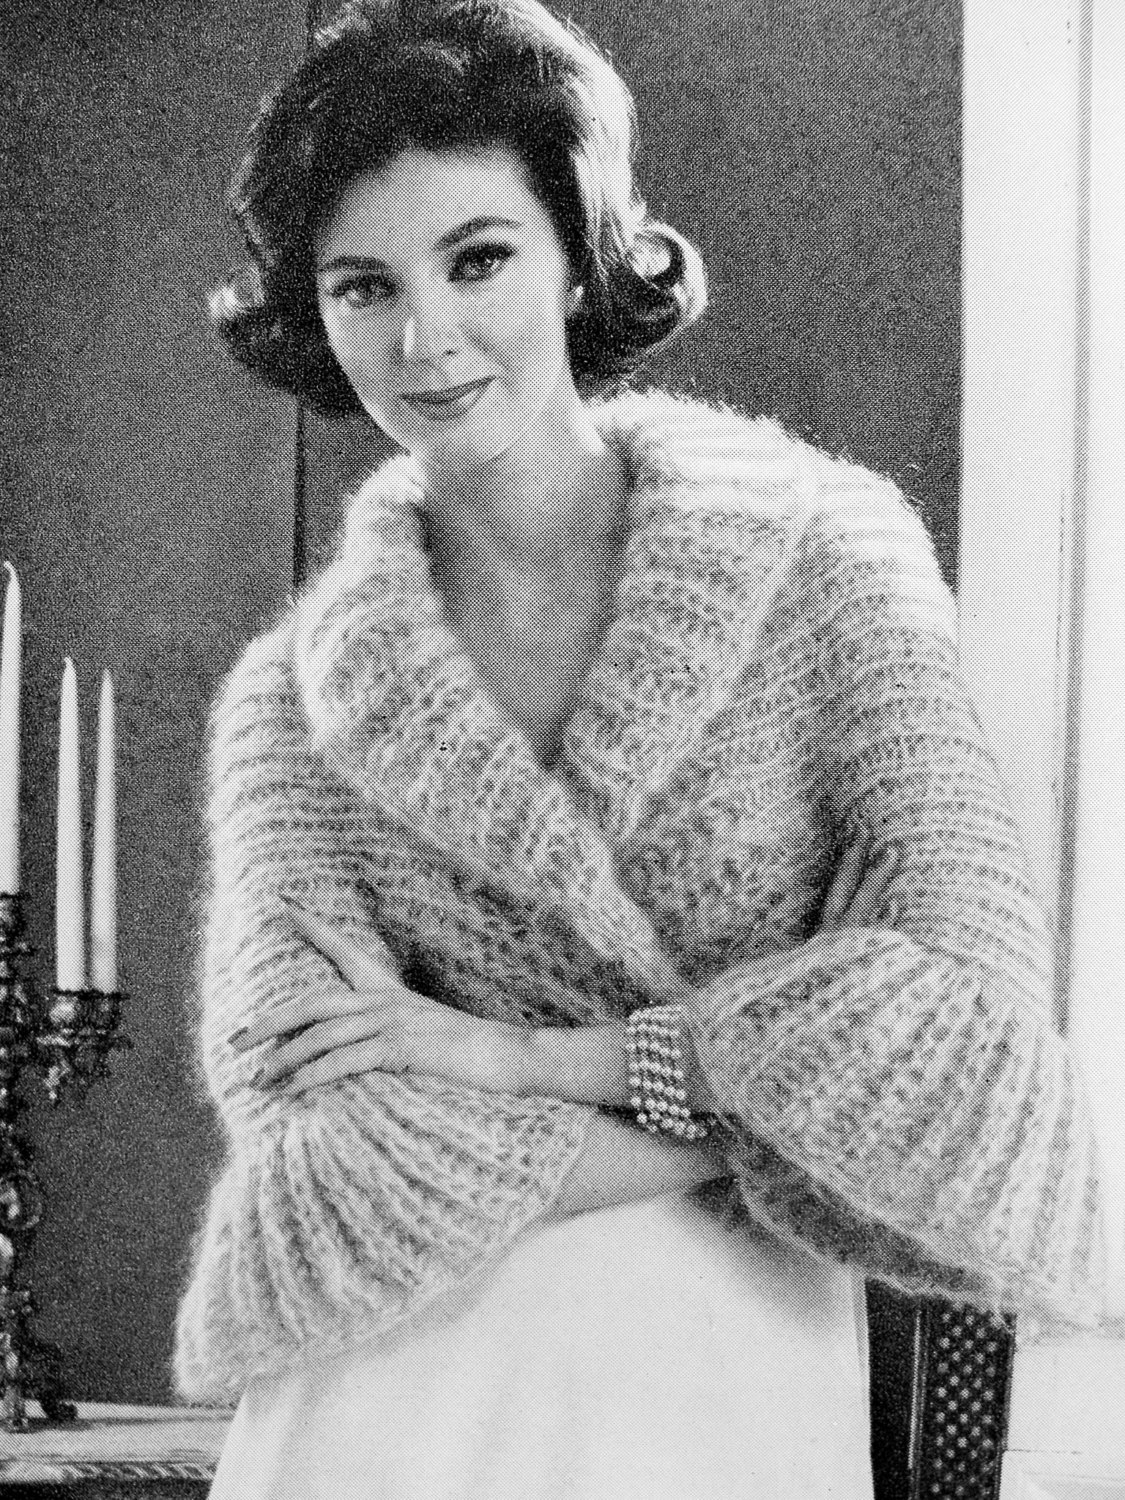 Sweater Jacket Knitting Pattern Instant Pdf Pattern 1960s Vintage Knitting Pattern Shrug Sweater Jacket Lovely Shawl Collar Bell Sleeves Day Or Evening Unique Knit Pattern